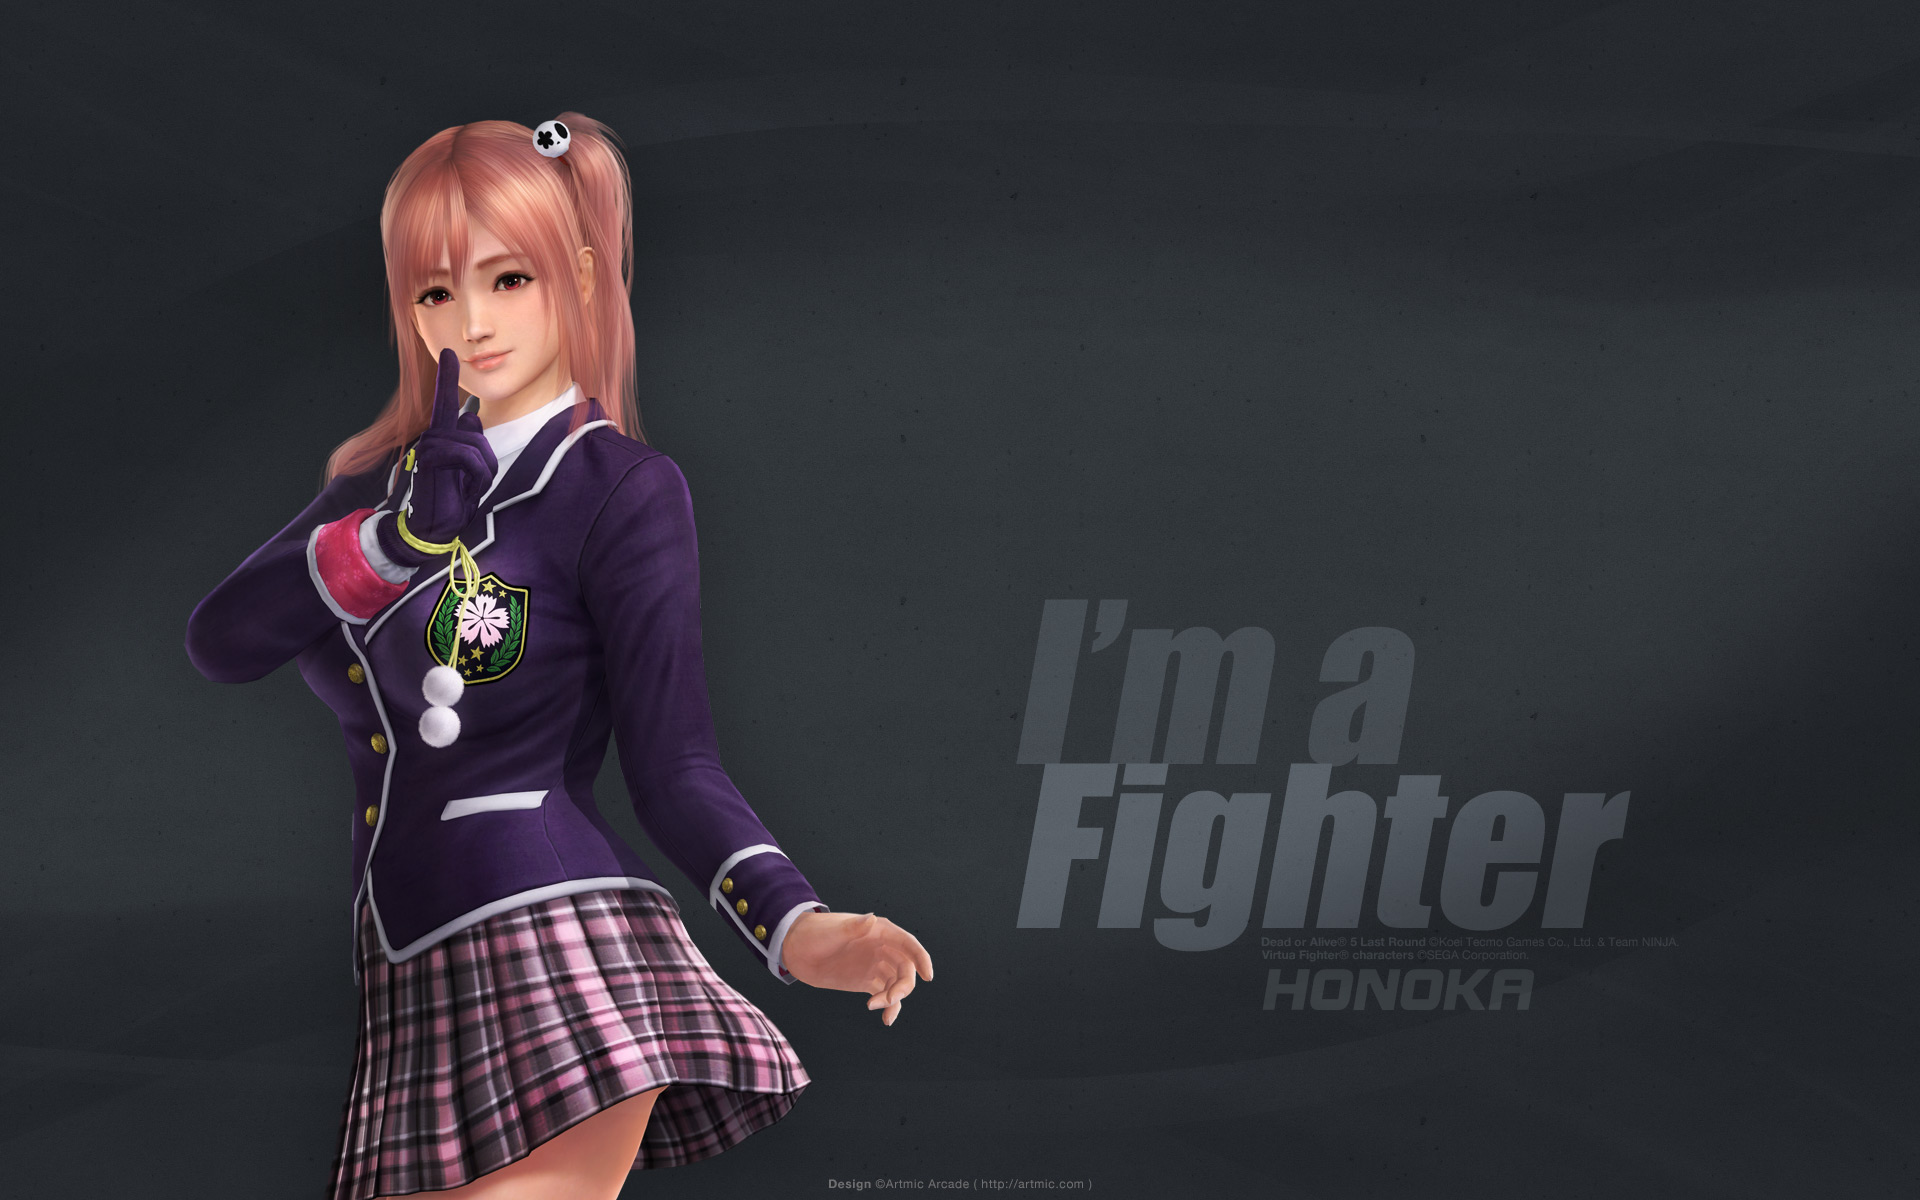 Free Download Doa5 Last Round Wallpapers 1a Doa5 Portal 1920x1200 Images, Photos, Reviews